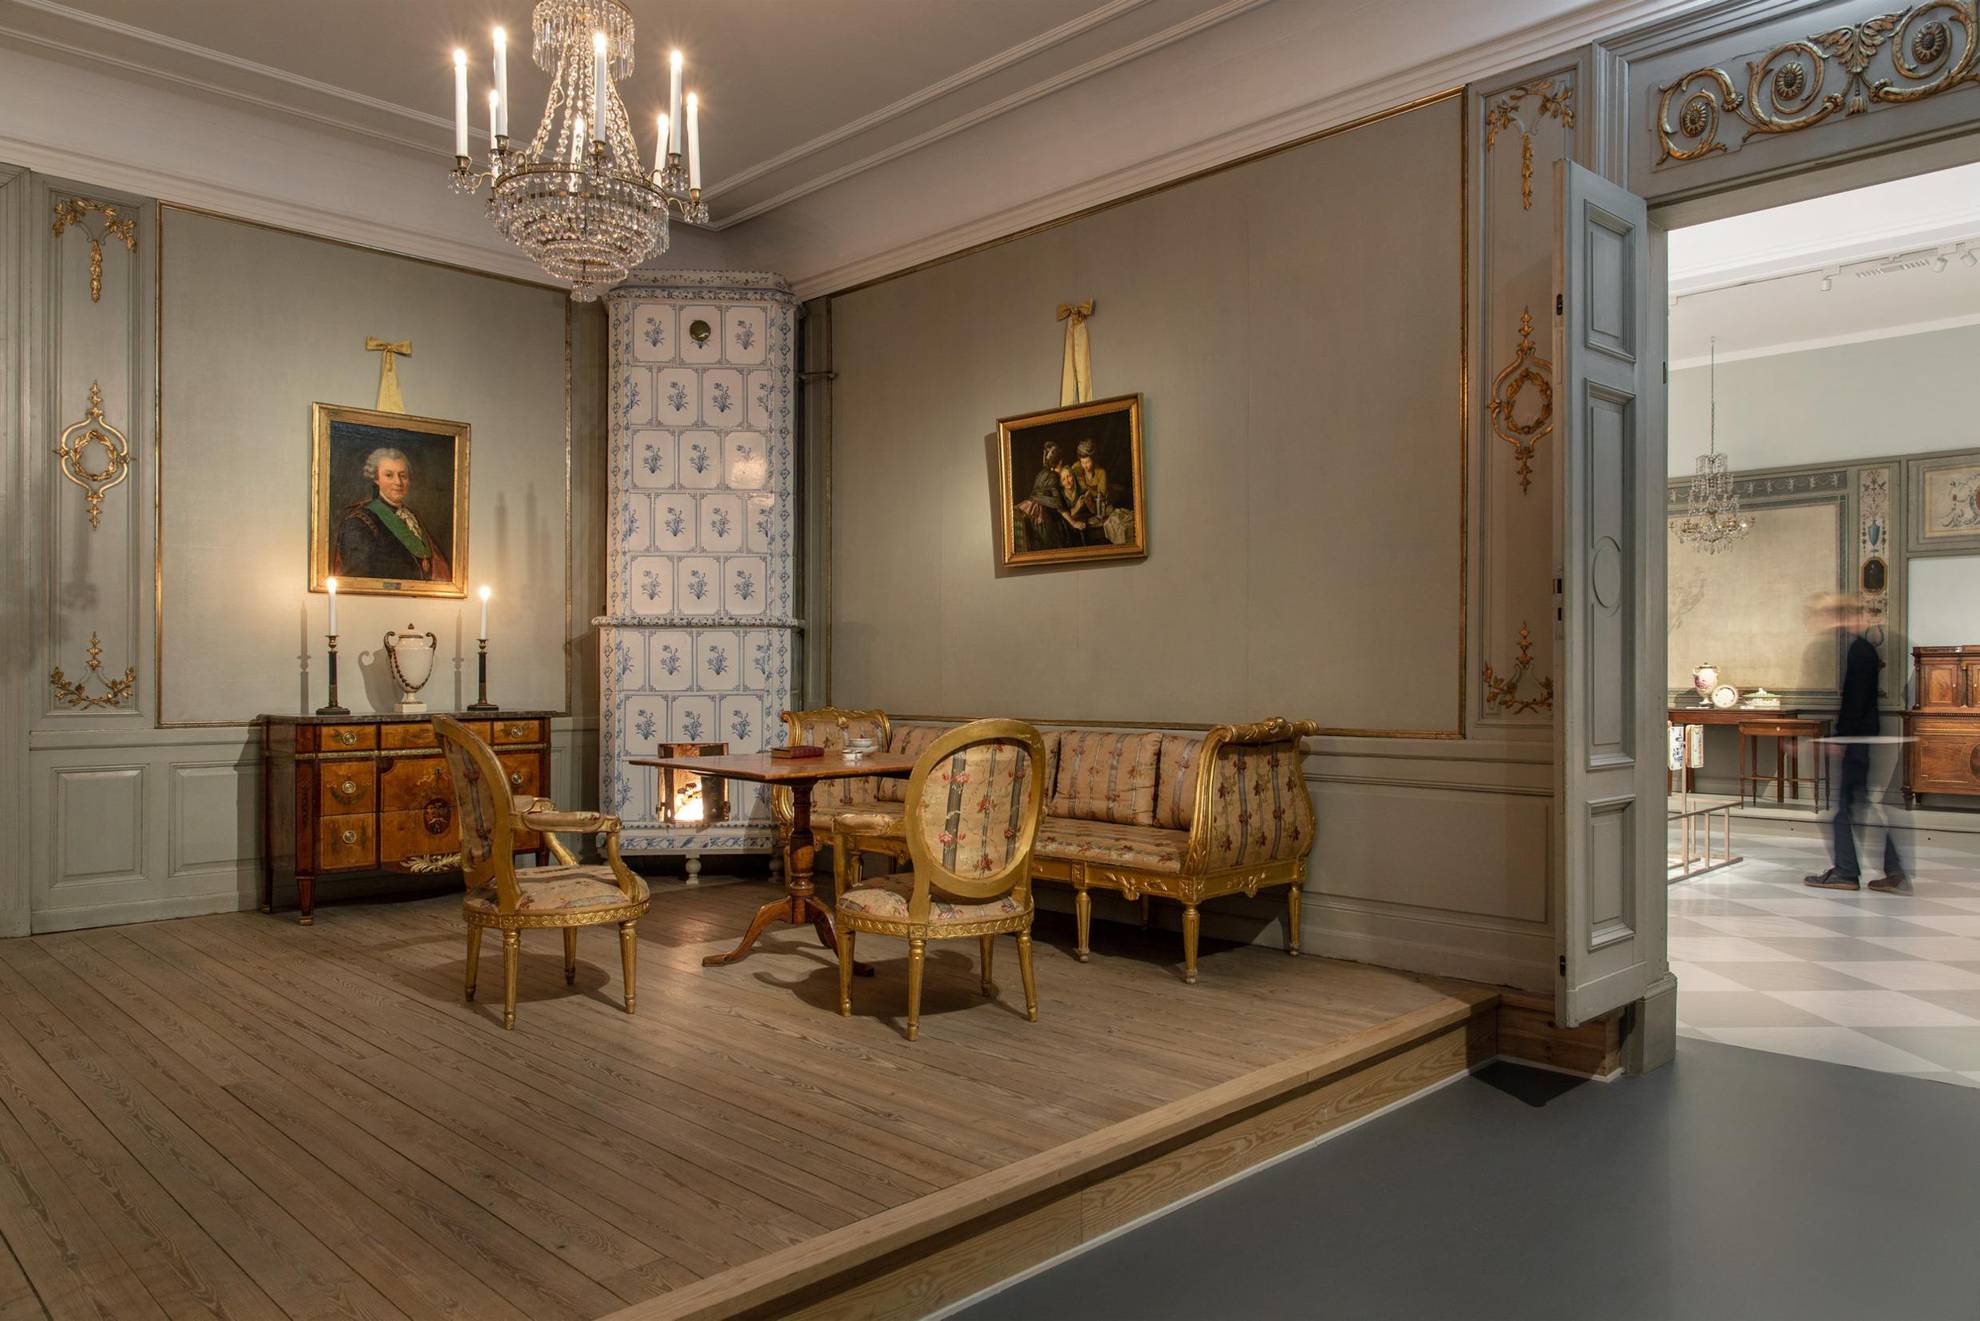 18th-Century furniture at an exhibition. A tile stove, a sofa and two chairs, a table and a chest of drawers, a crystal chandelier hanging from the ceiling and two paintings on the wall.